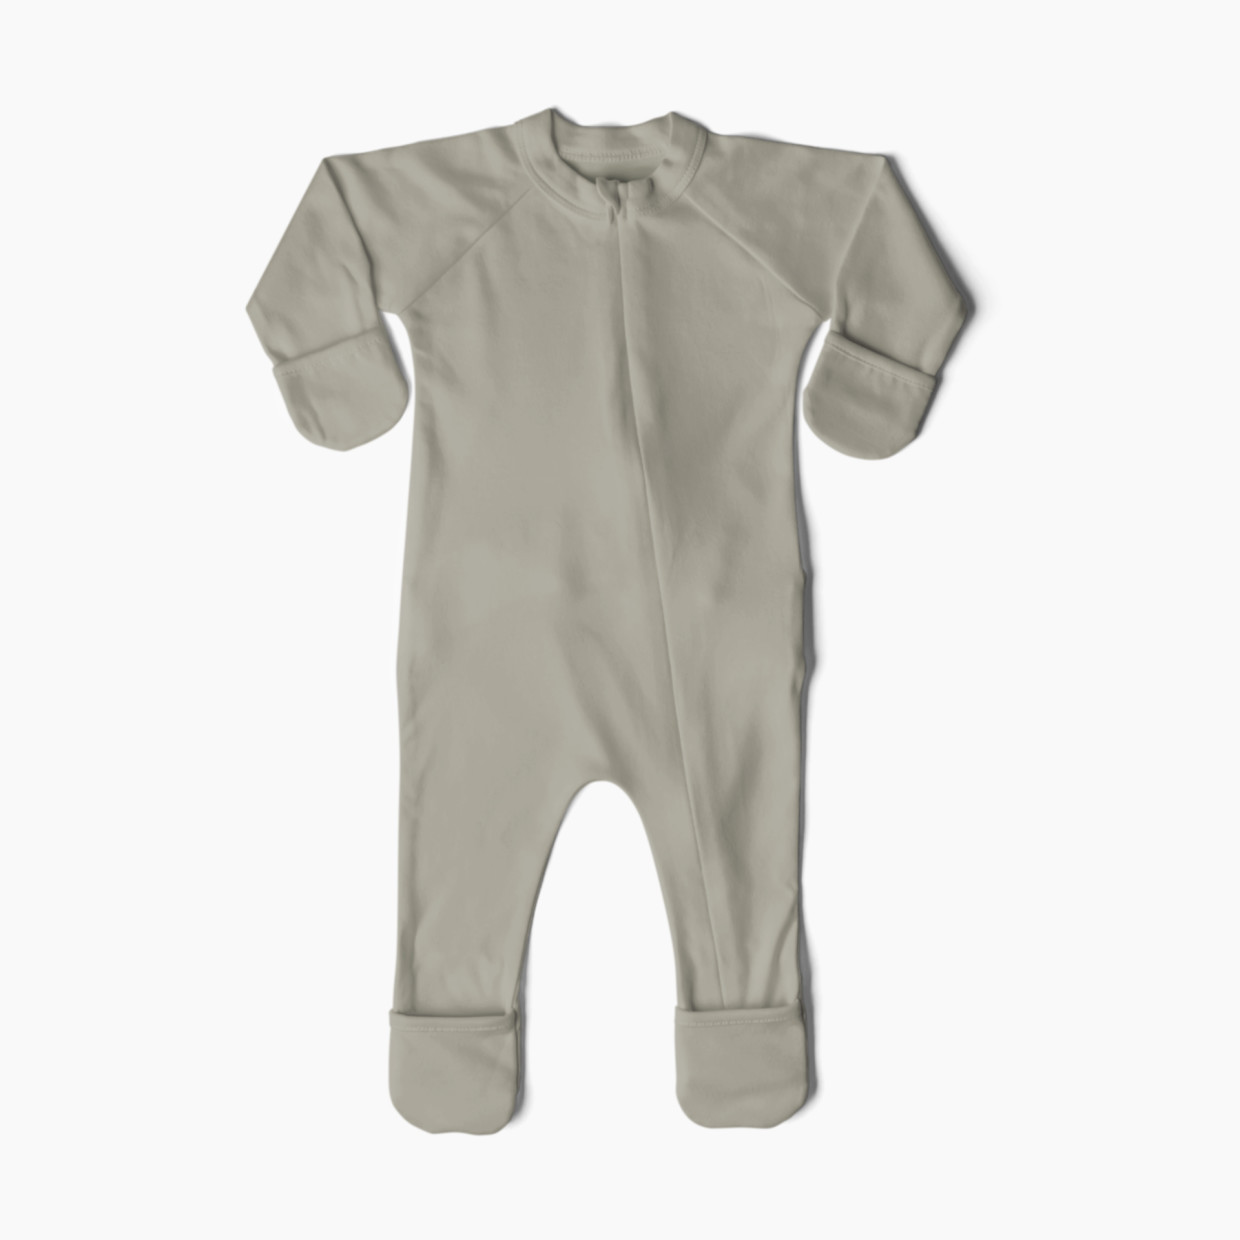 Goumi Kids Grow With You Footie - Loose Fit - Moss, 0-3 M.